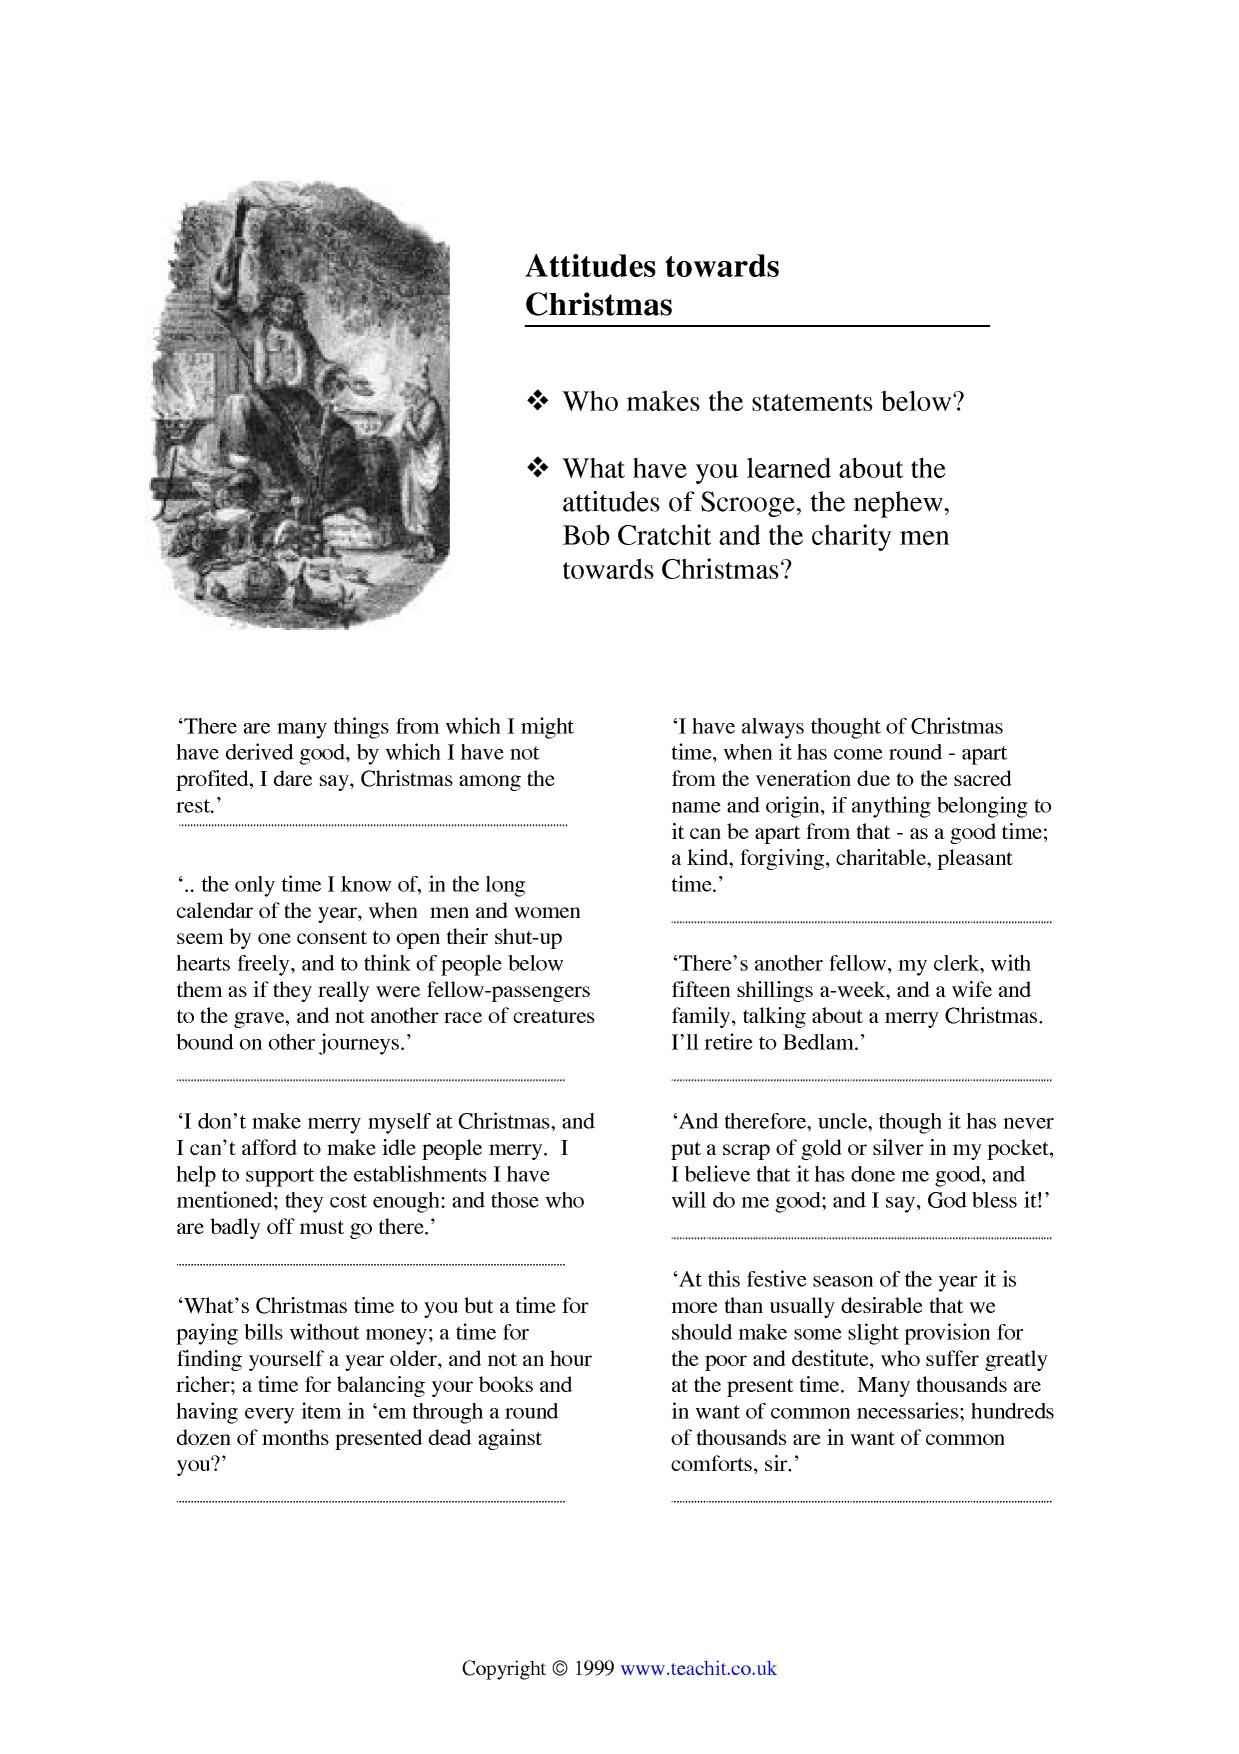 A Christmas Carol by Charles Dickens | KS3 Prose | Key Stage 3 | Resources